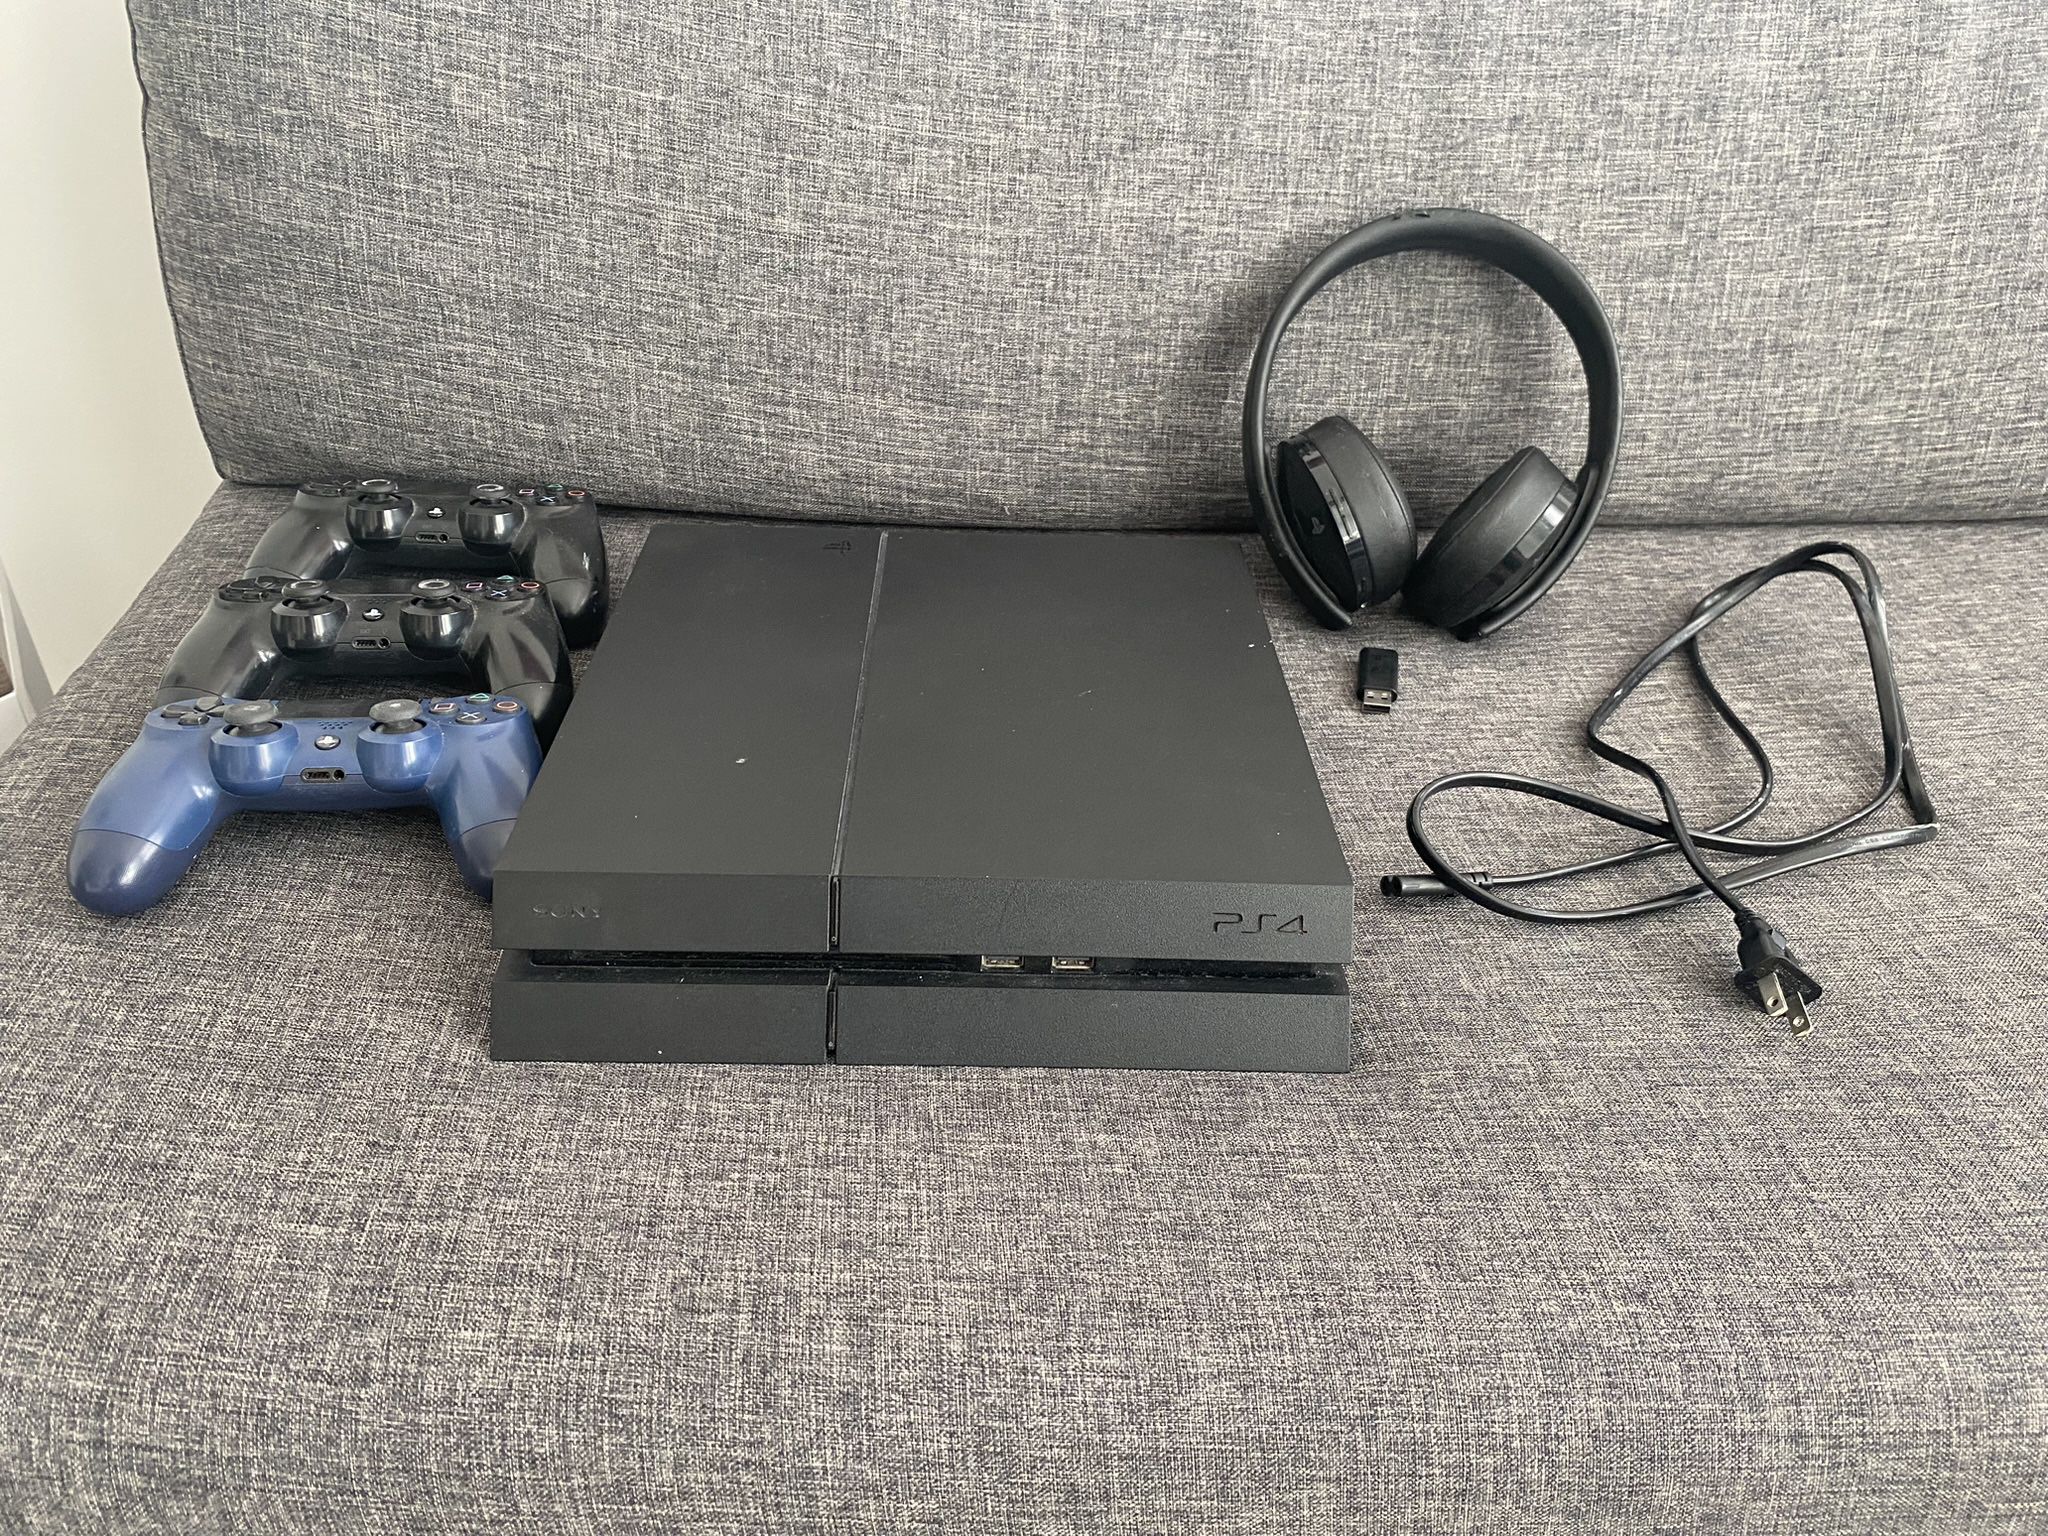 PS4 With Headset And 3 Controllers